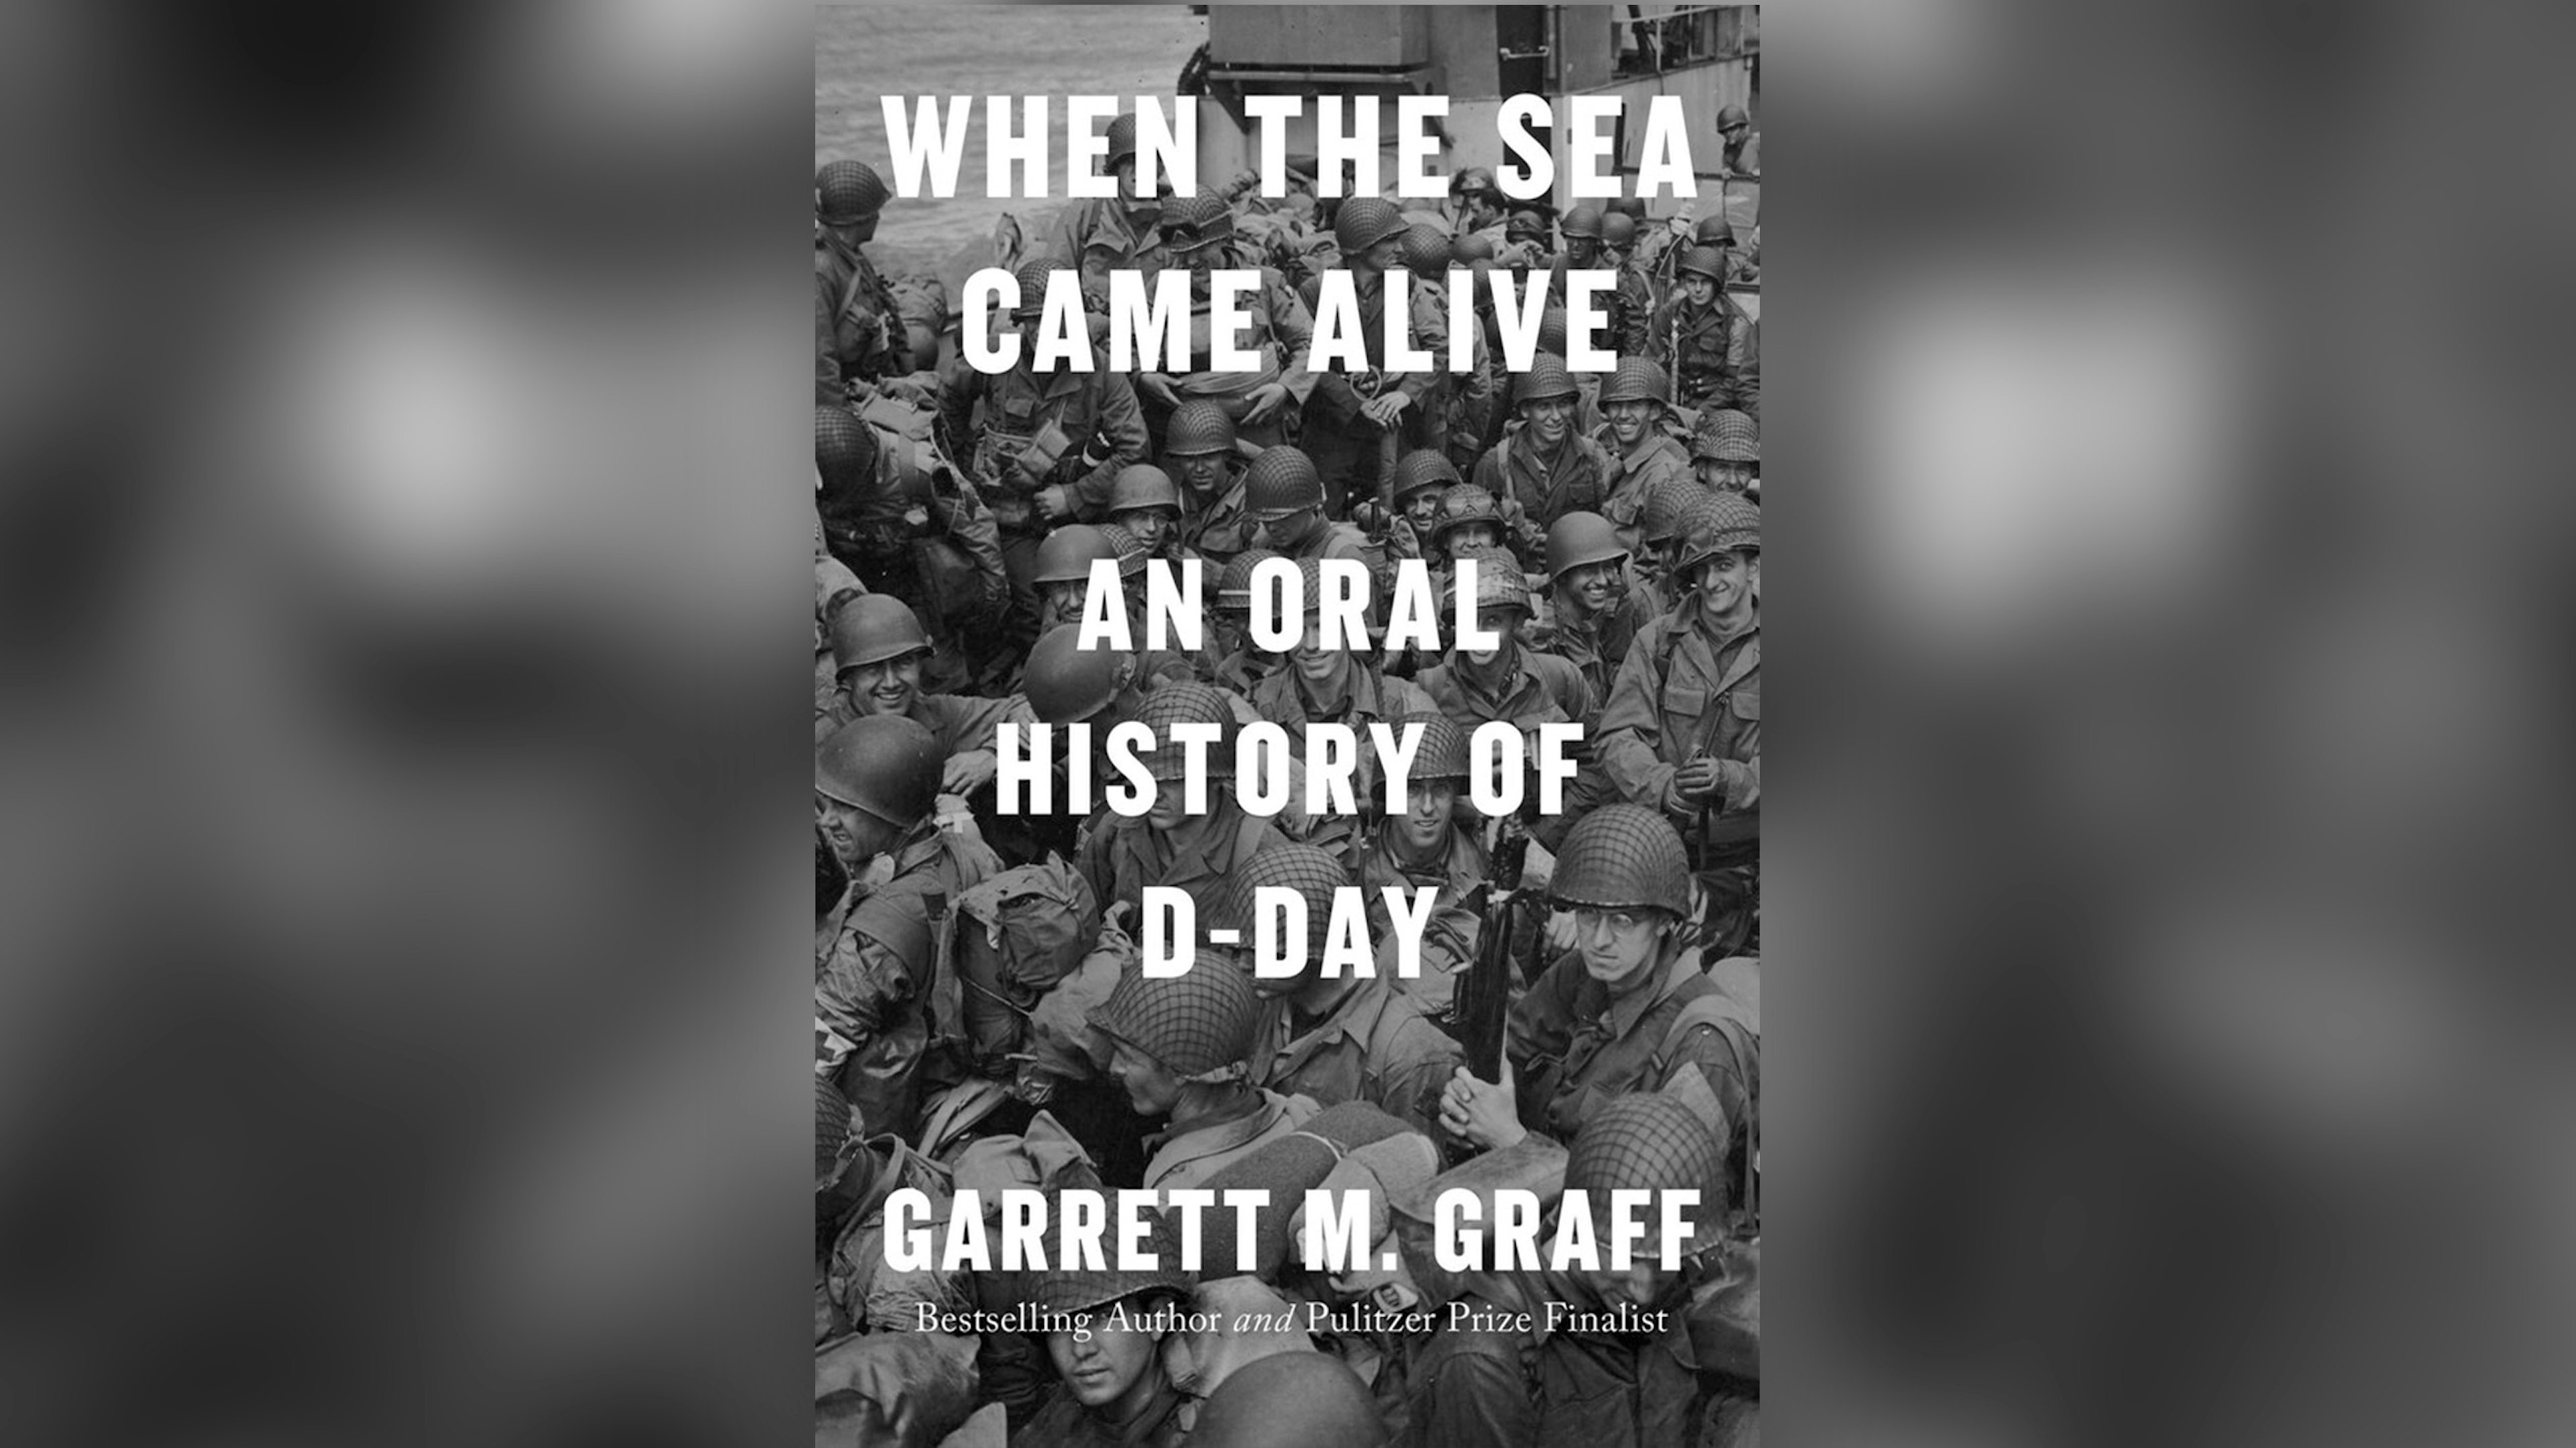 Cover of Garrett Graff's book 'When the Sea Came Alive: An Oral History of D-Day,' which has white text with text "When the Sea Came Alive: An Oral History of D-Day, Garrett M. Graff, Bestselling author and Pulitzer Prize finalist" over a black and white photo of a D-Day army brigade.